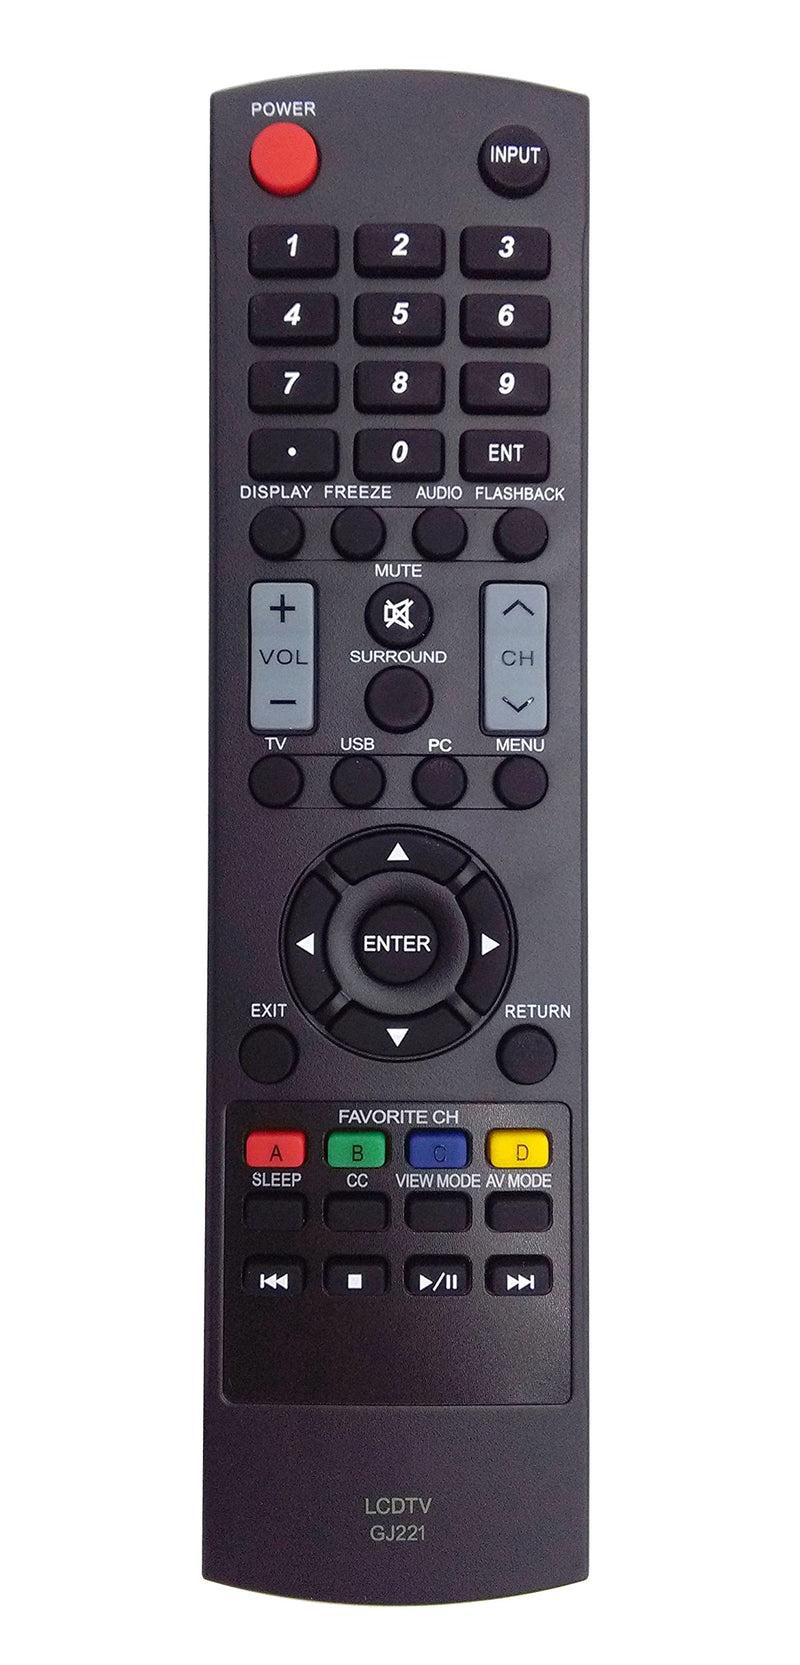 GJ221 Replace Remote Control fit for Sharp TV LC26SV490U LC-26SV490U LC32D59 LC-32D59 LC32D59U LC-32D59U LC32LE440U LC-32LE440U LC32LE450U LC-32LE450U LC-32LE451U LC32LE451